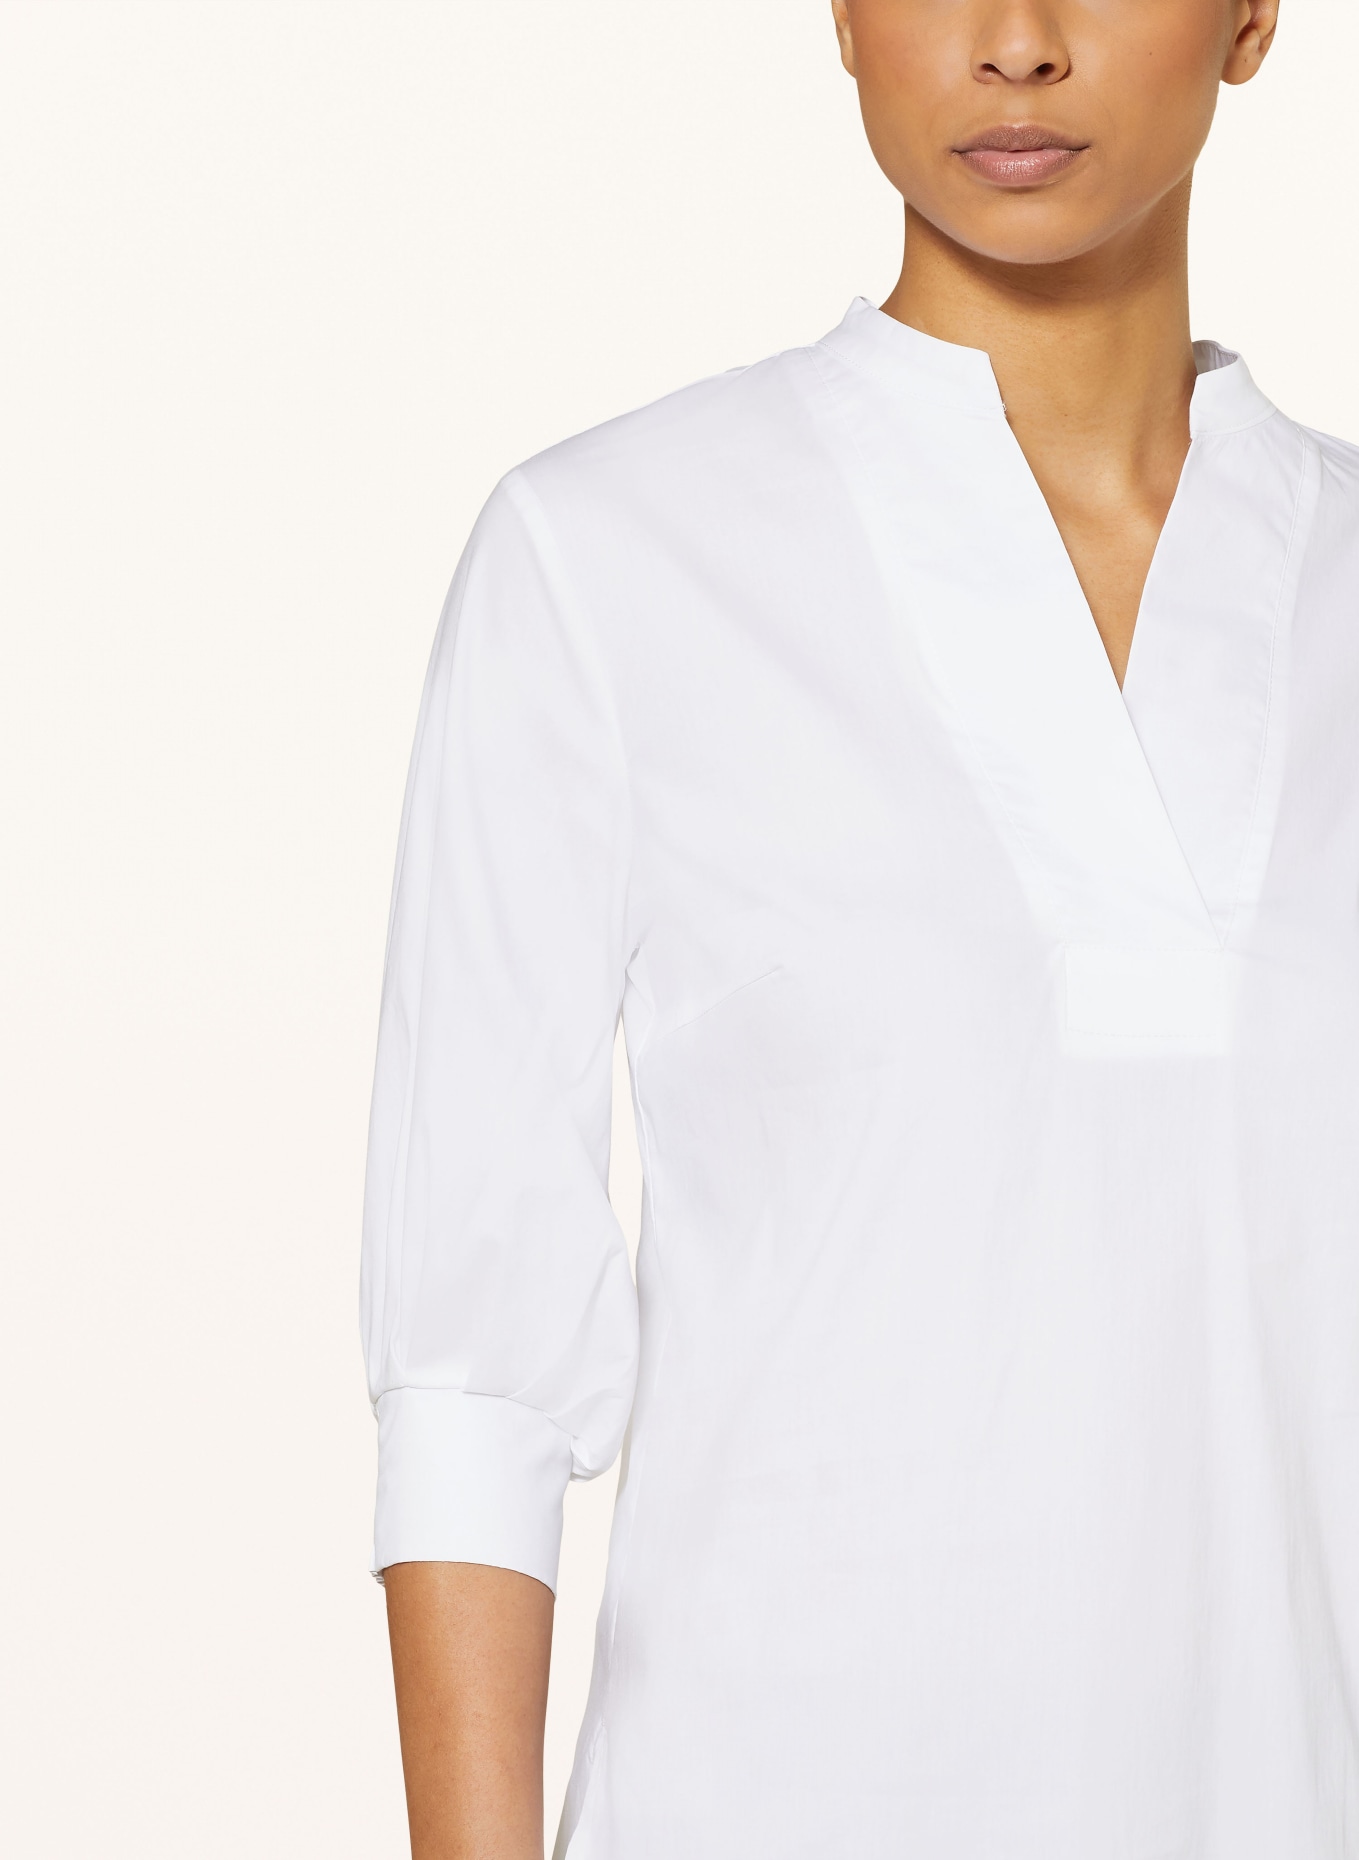 MORE & MORE Shirt blouse with 3/4 sleeves, Color: WHITE (Image 4)